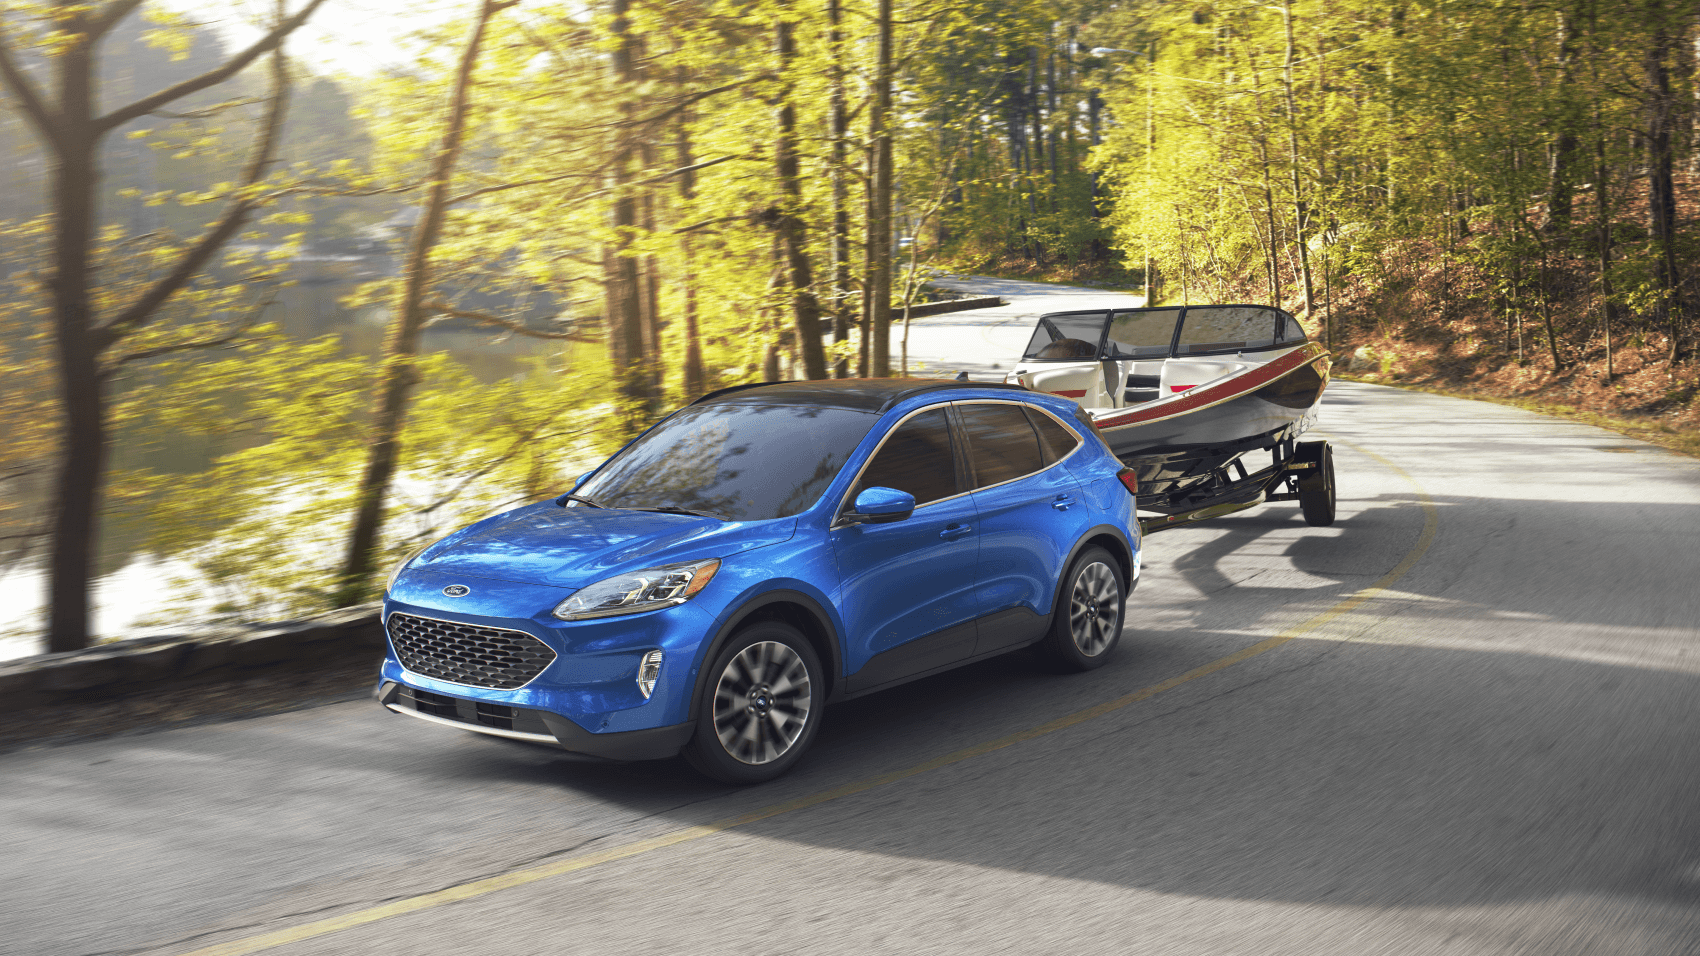 2021 Ford Escape Blue Towing Boat